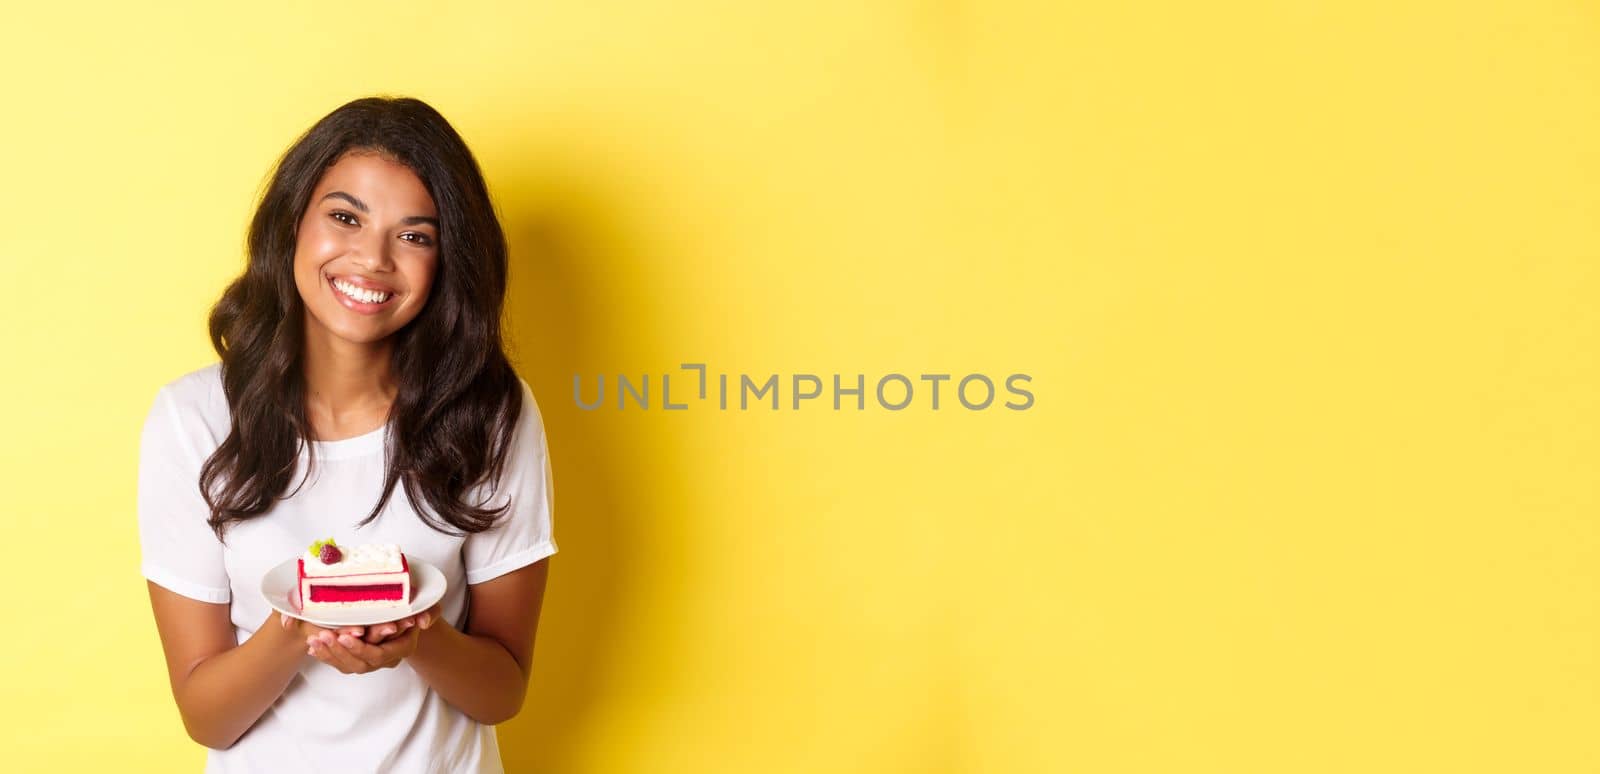 Portrait of cute african-american girl, holding piece of cake and smiling, standing over yellow background.